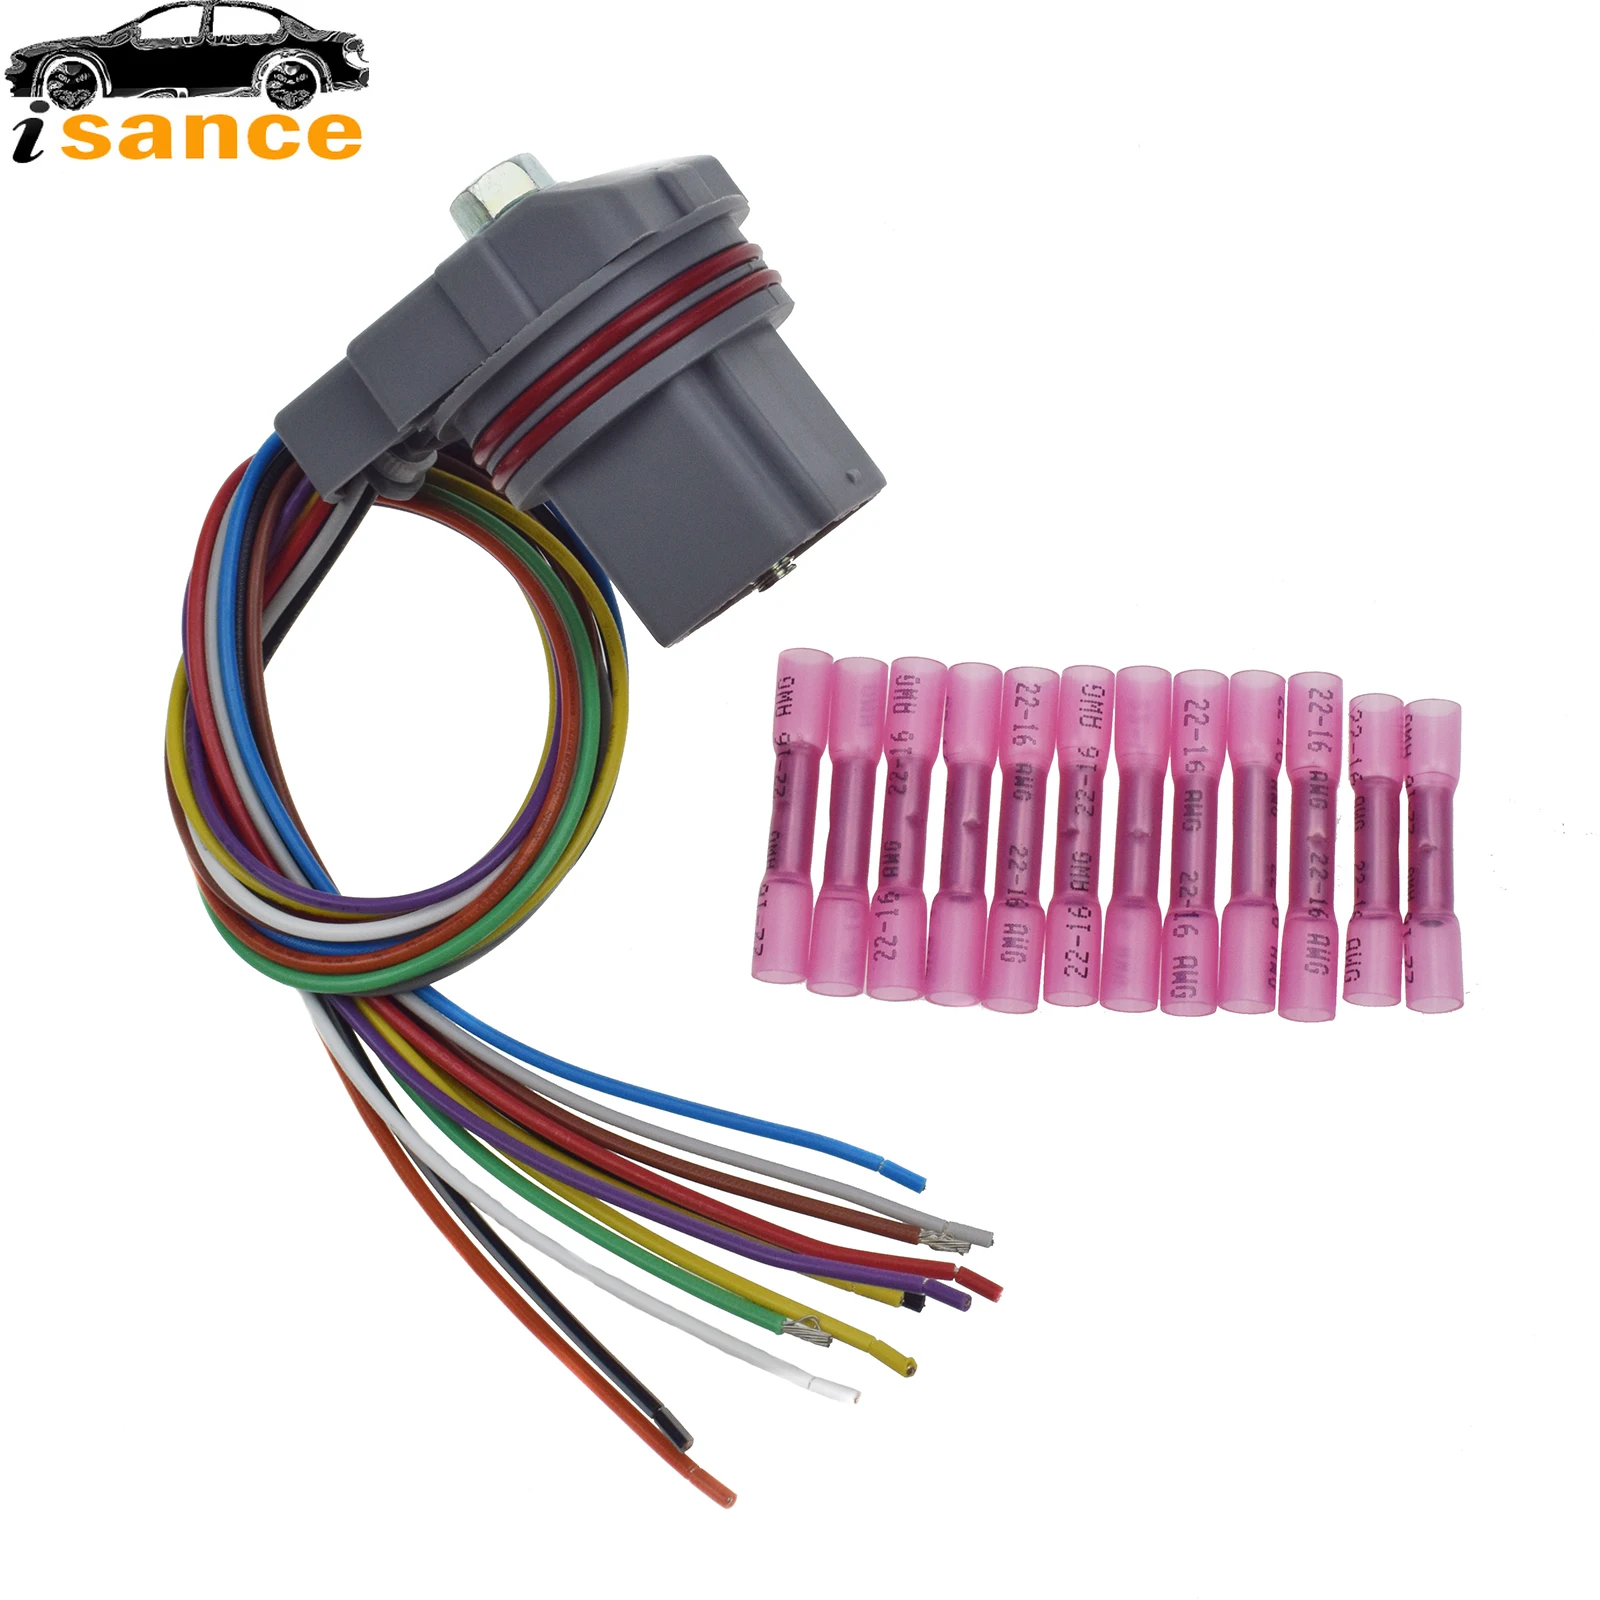 Isance New Transmission Wire Harness Piil  For  Explorer  Thunderbird Lincoln 46 - $127.53